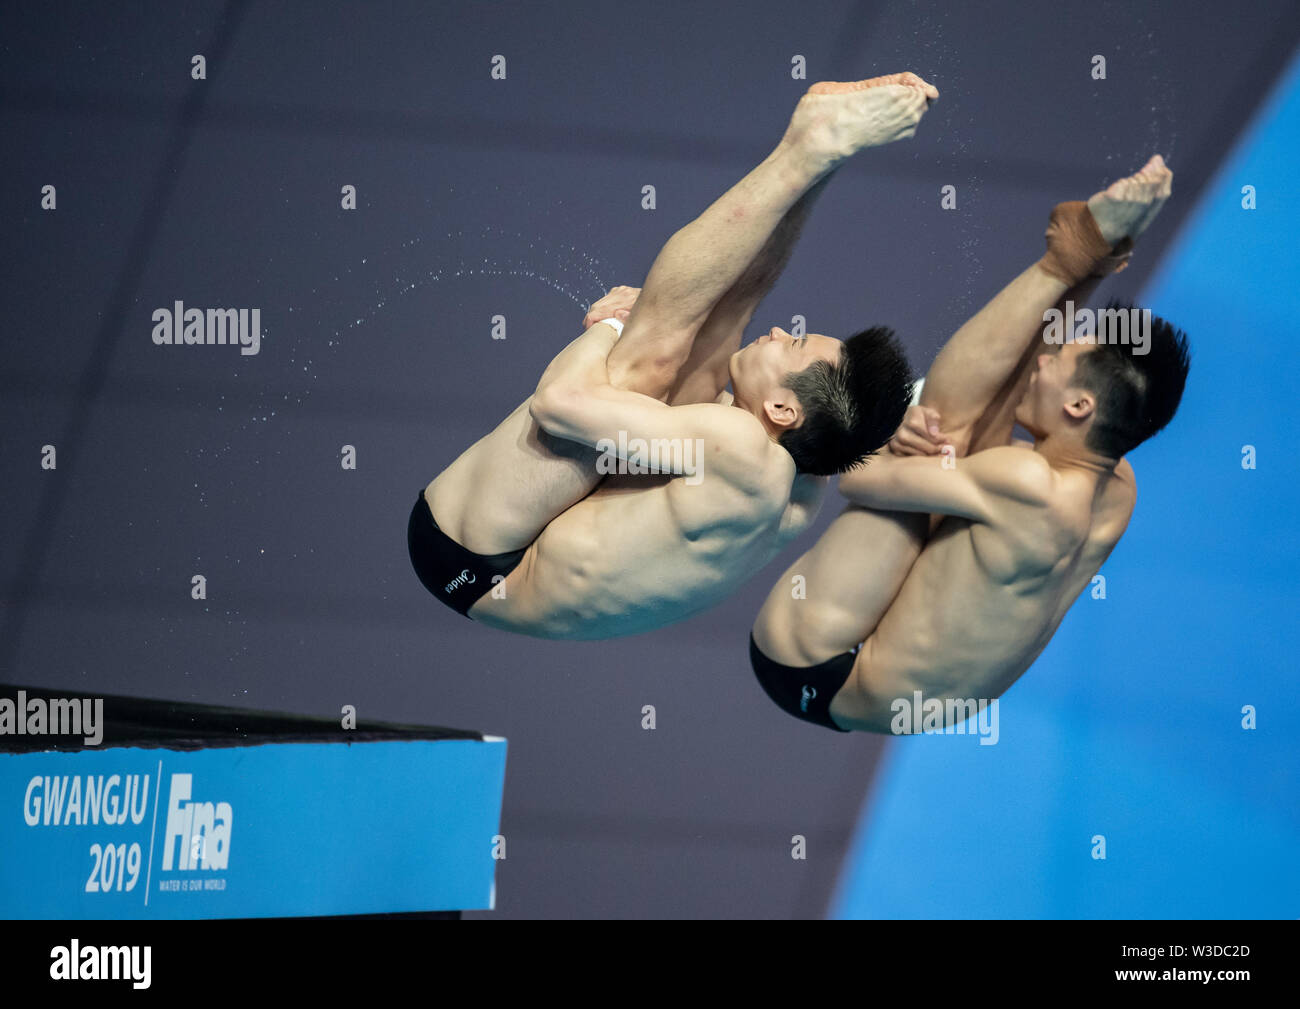 Gwangju, South Korea. 15th July, 2019. Swimming world championship: water diving, ten-meter tower synchronized diving men, qualification. The water jumpers Yuan Cao and Aisen Chen from China in action. Credit: Bernd Thissen/dpa/Alamy Live News Stock Photo